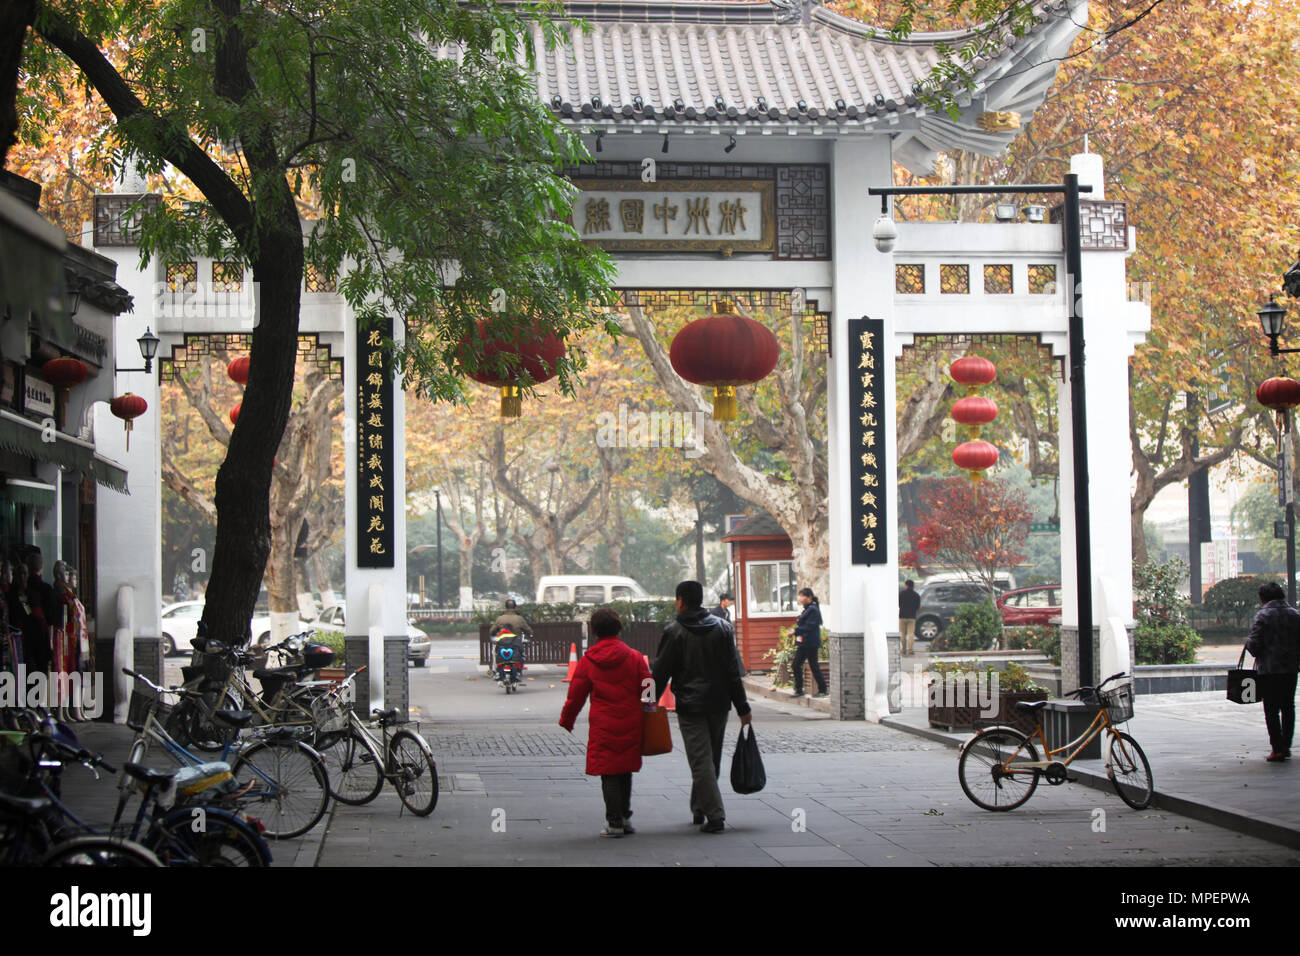 Chinese people in the Silk Road of Hangzhou Stock Photo